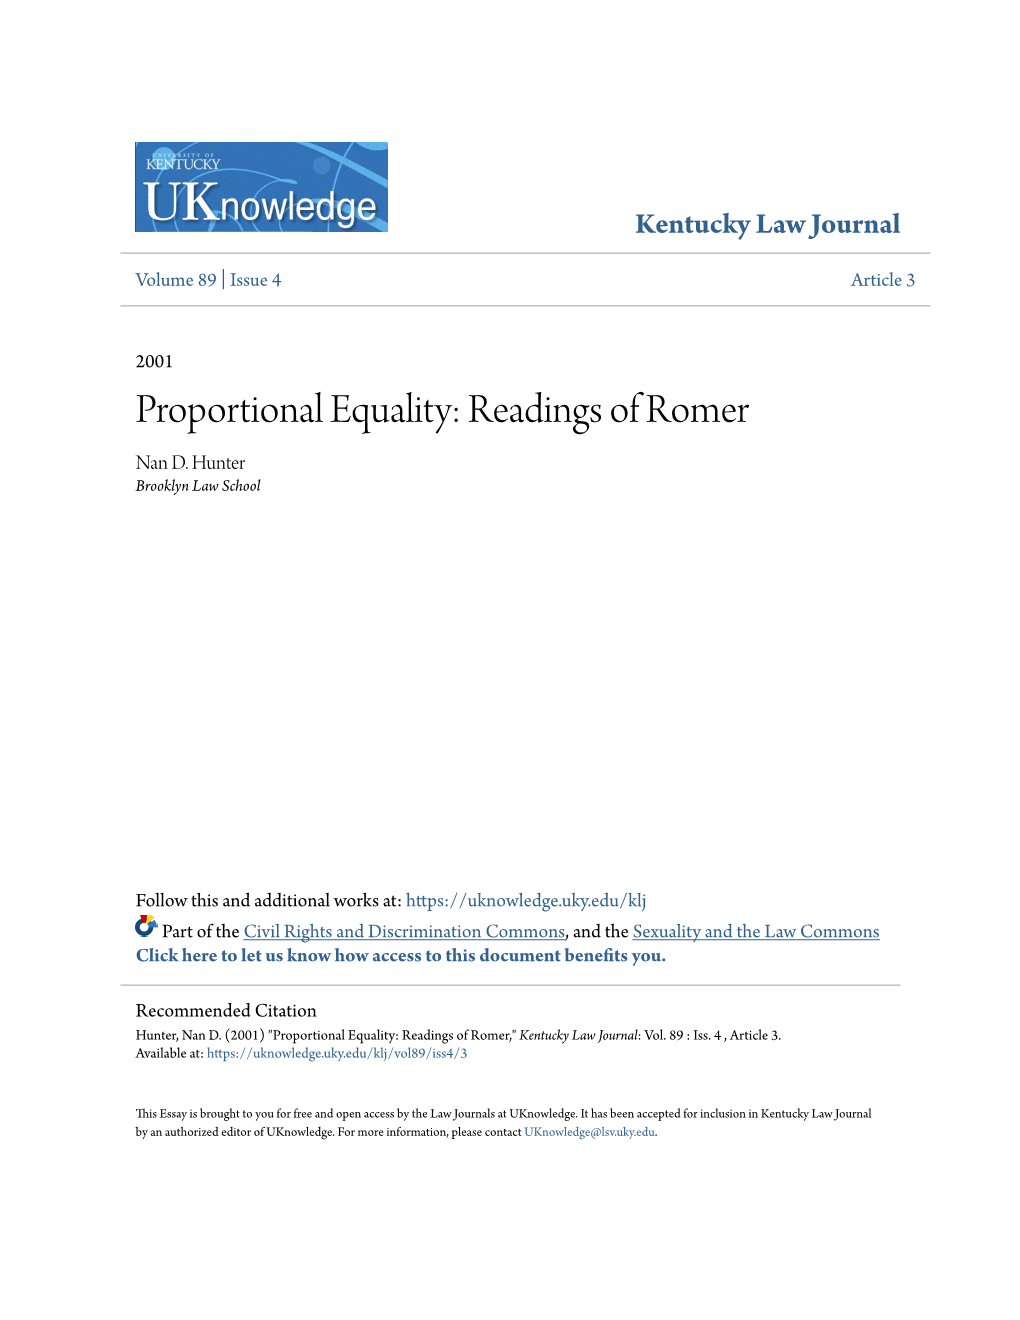 Proportional Equality: Readings of Romer Nan D